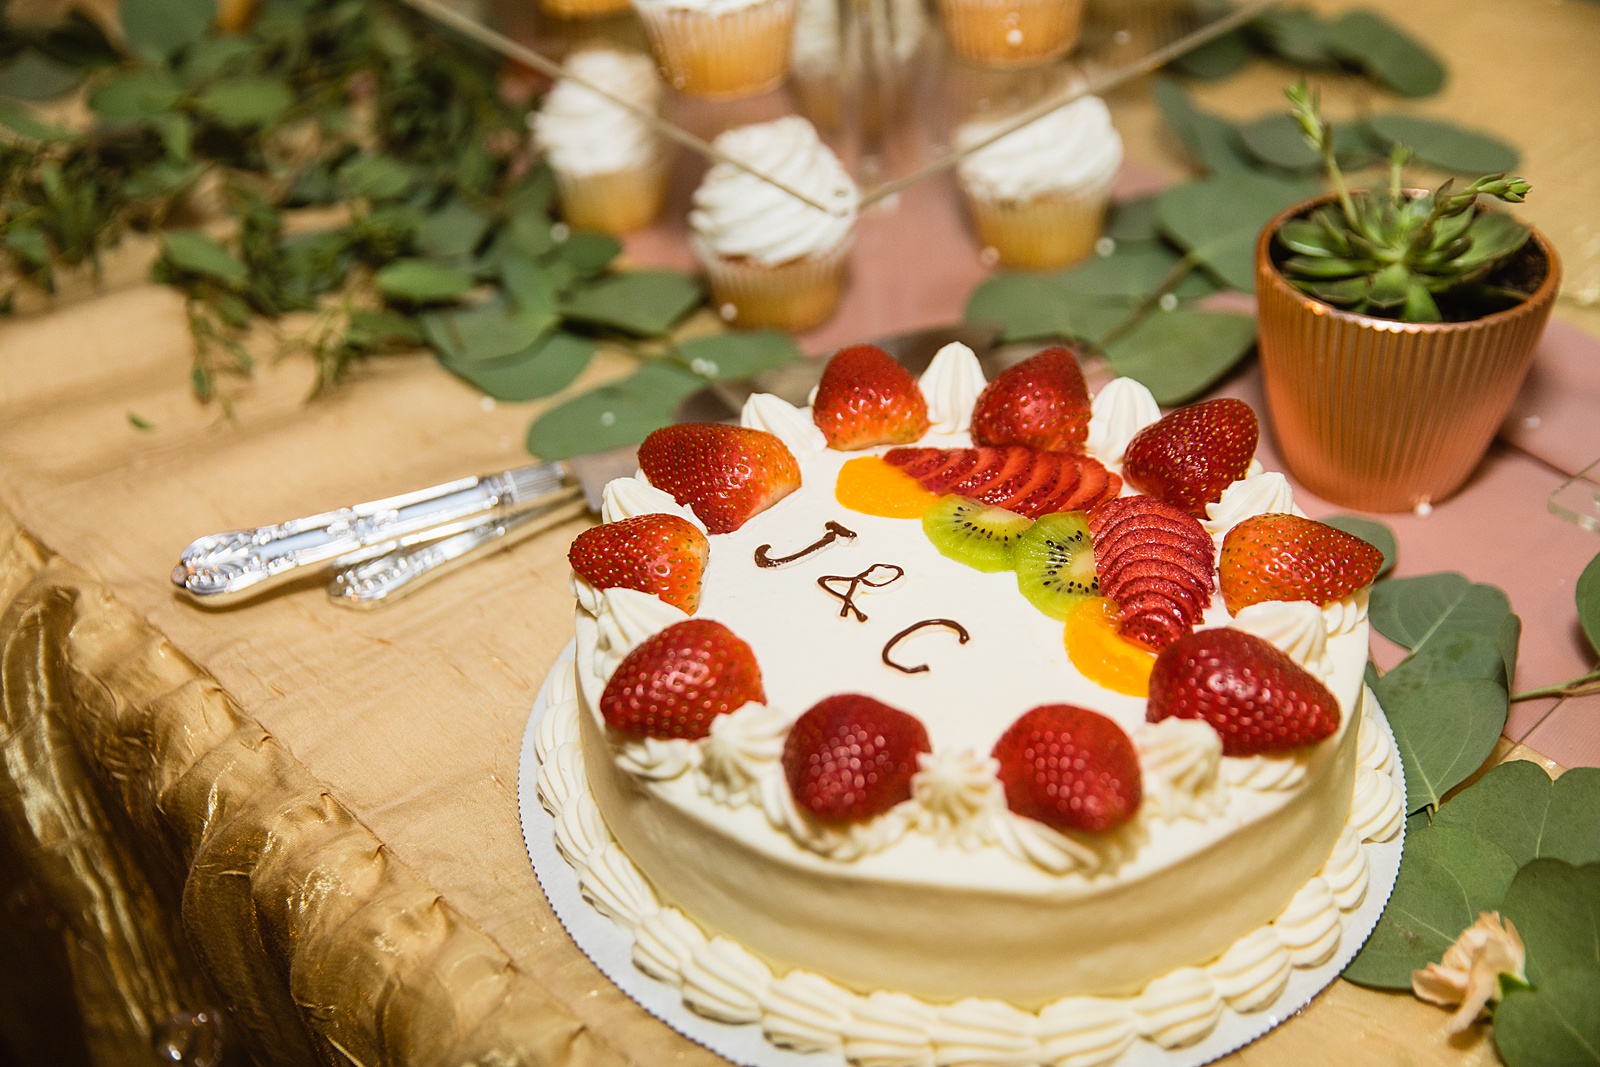 Simple wedding cake with fruit by PMA Photography.